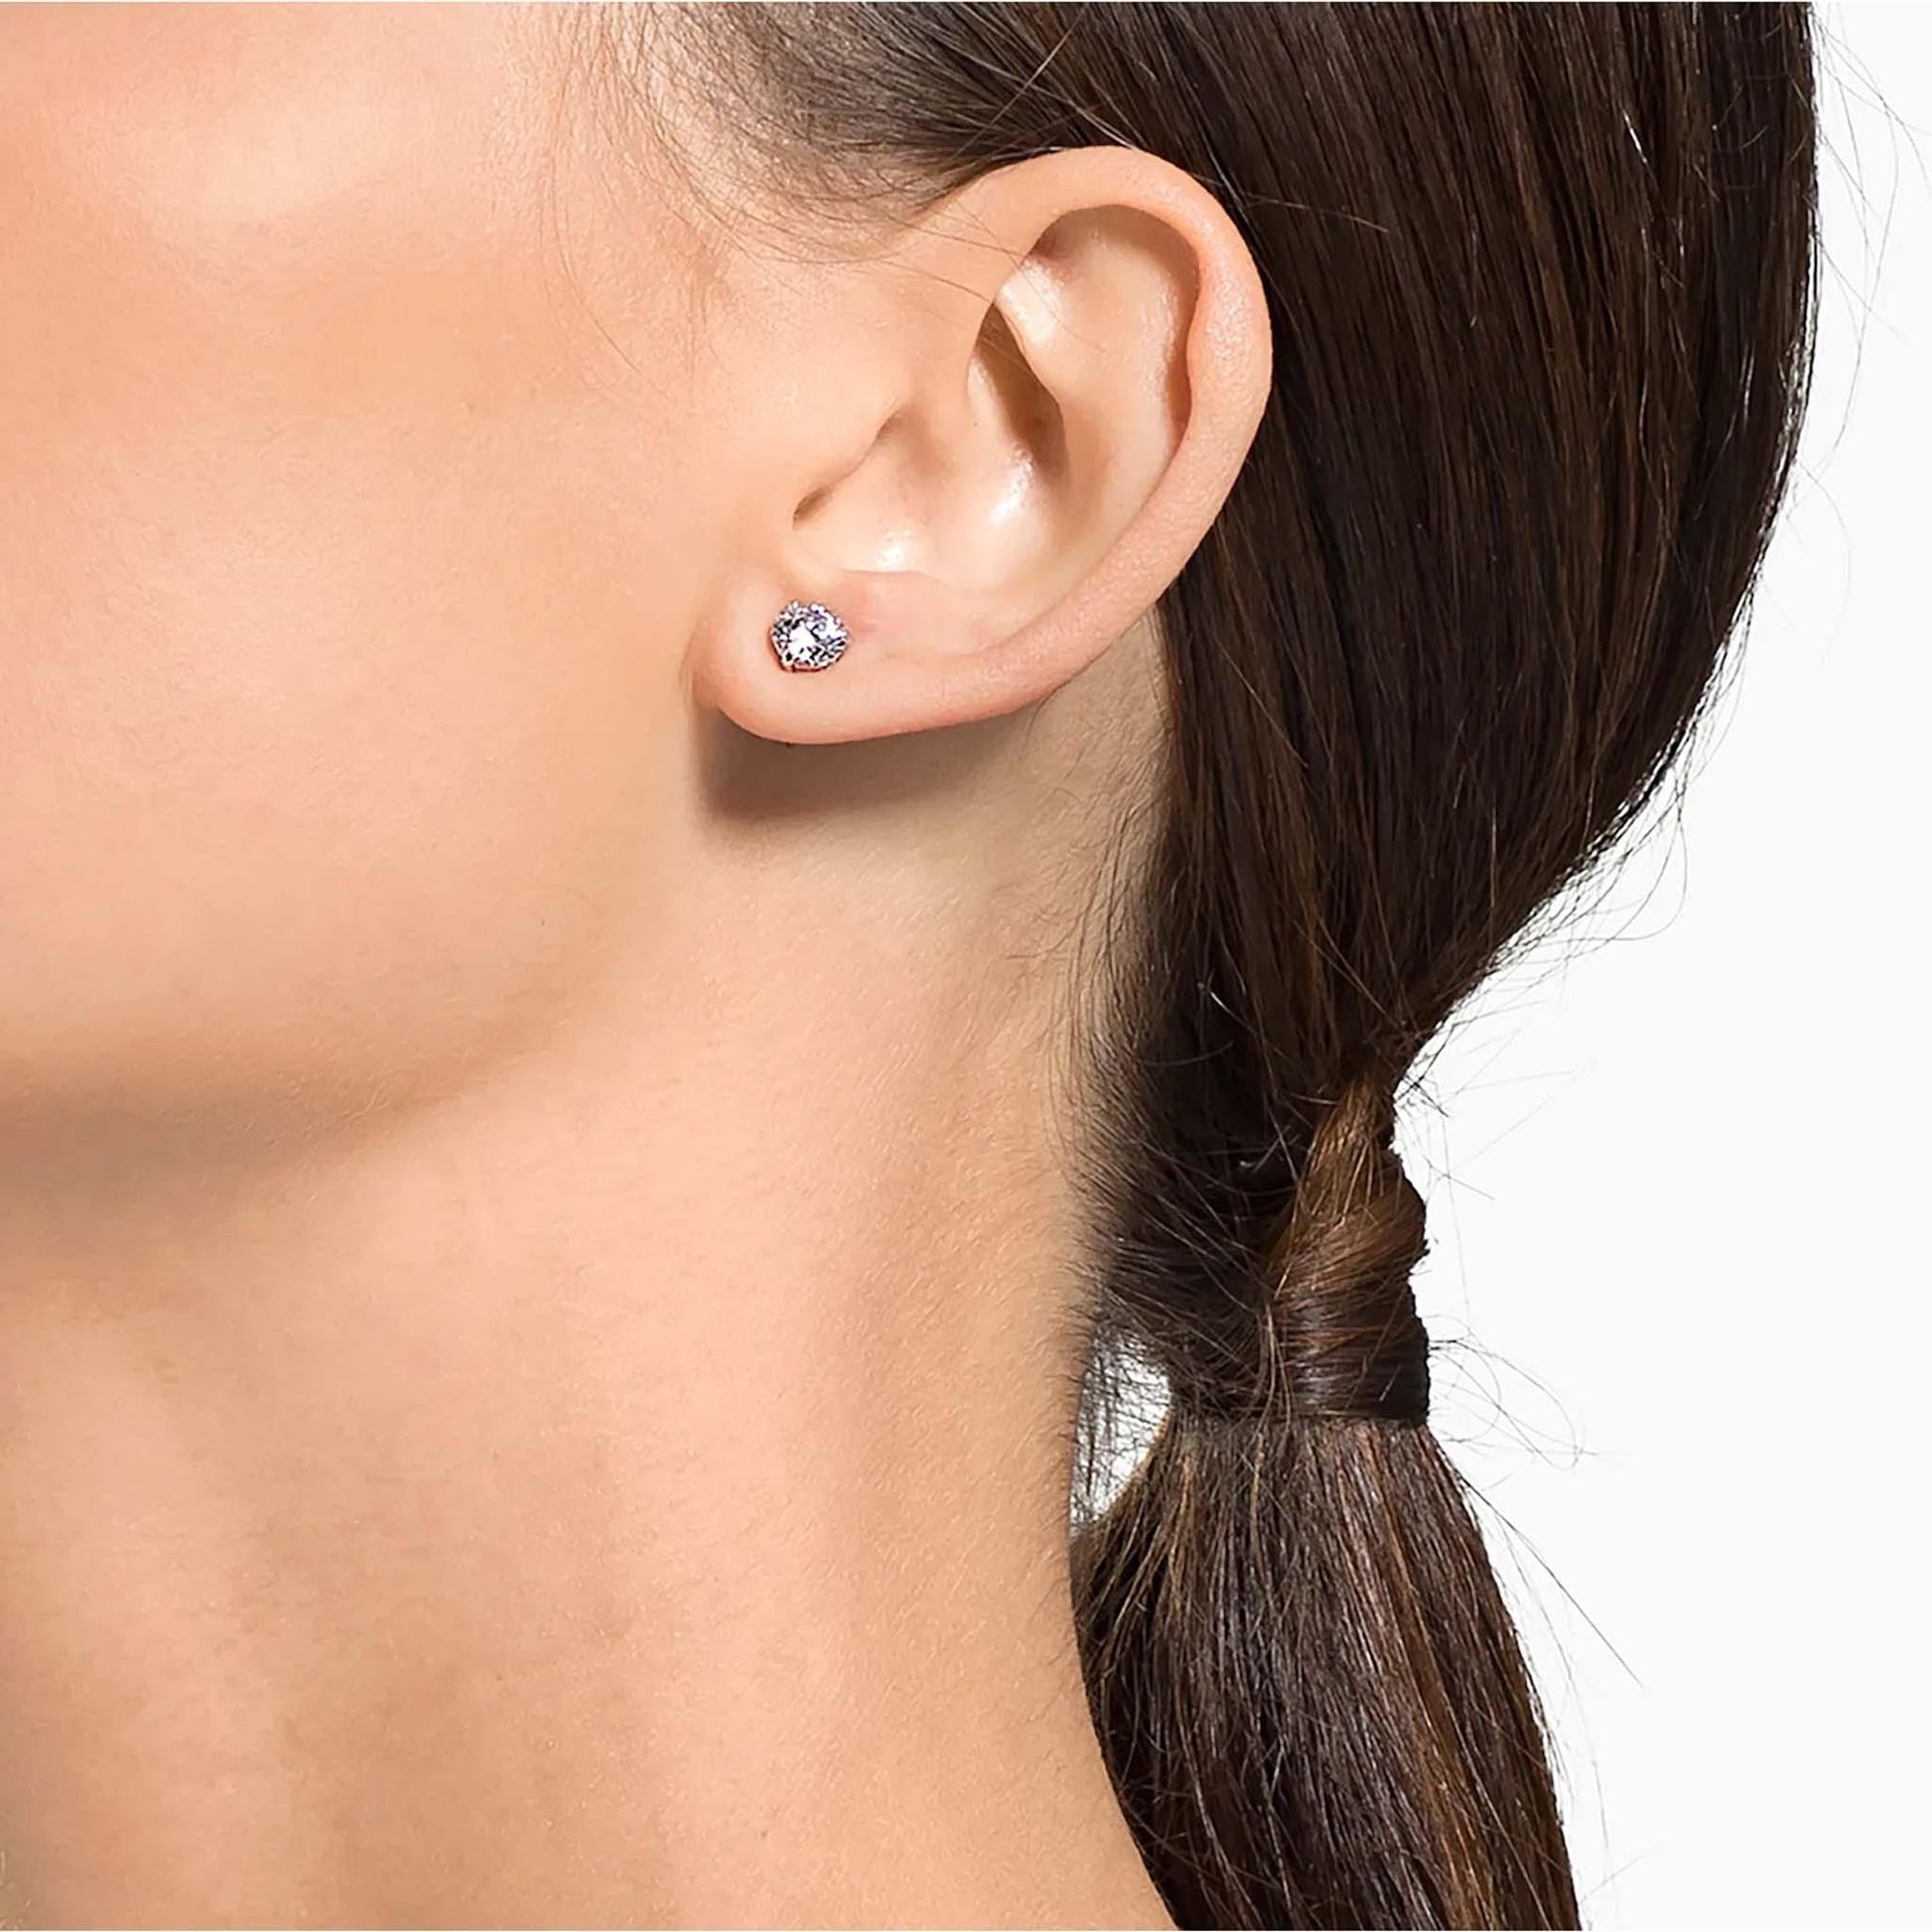 Attract stud earrings - Cosmos Boutique New Jersey